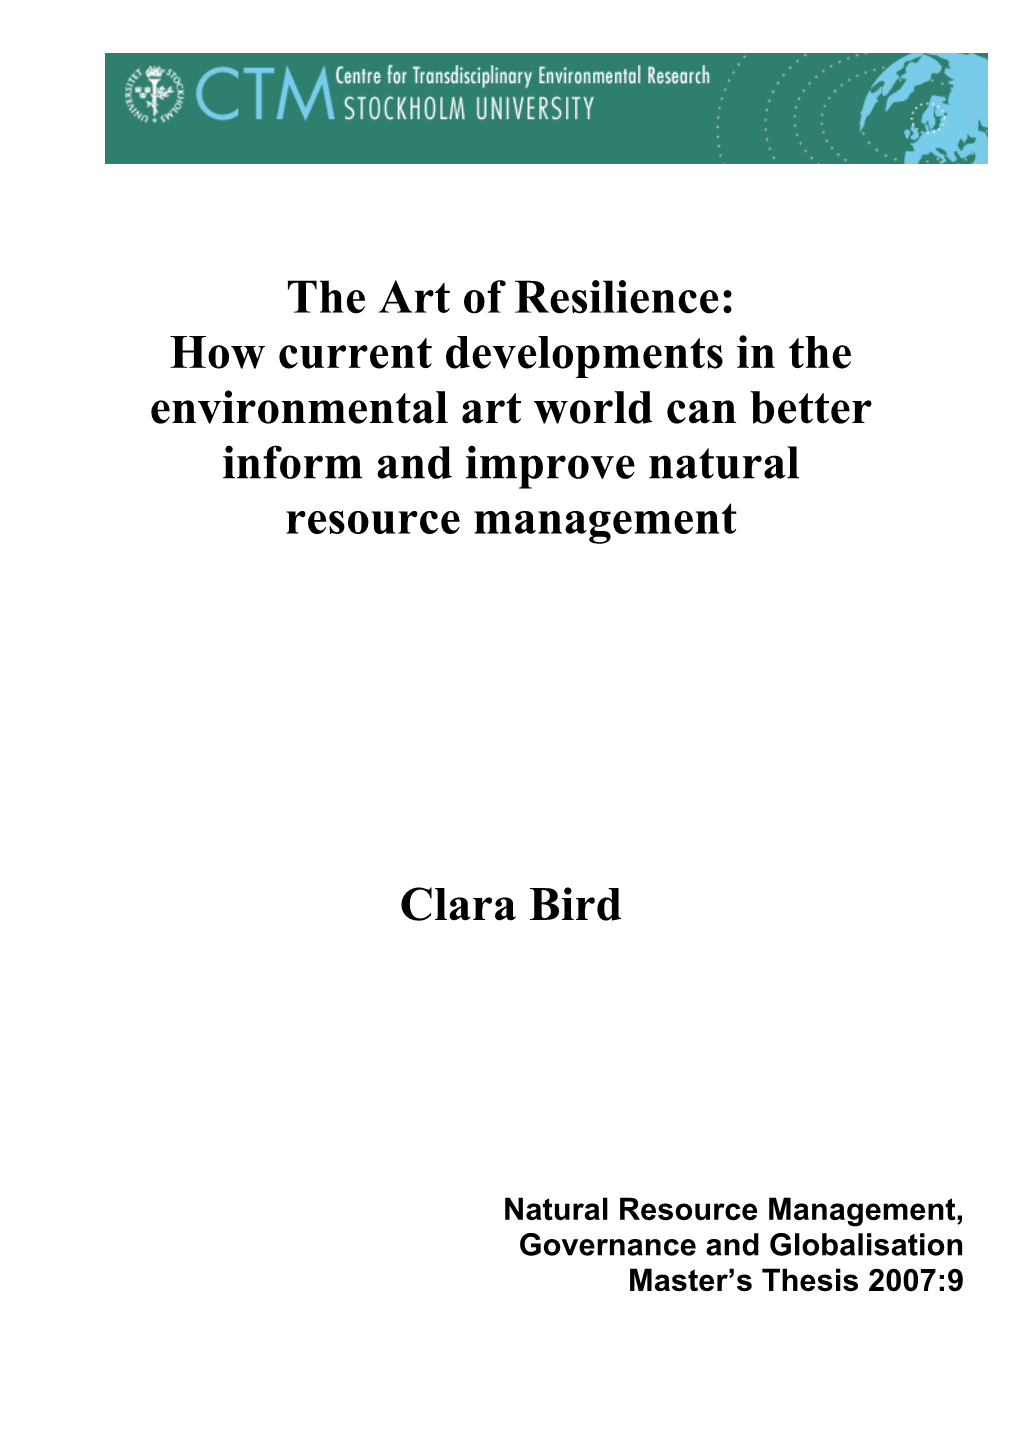 The Art of Resilience: How Current Developments in the Environmental Art World Can Better Inform and Improve Natural Resource Management